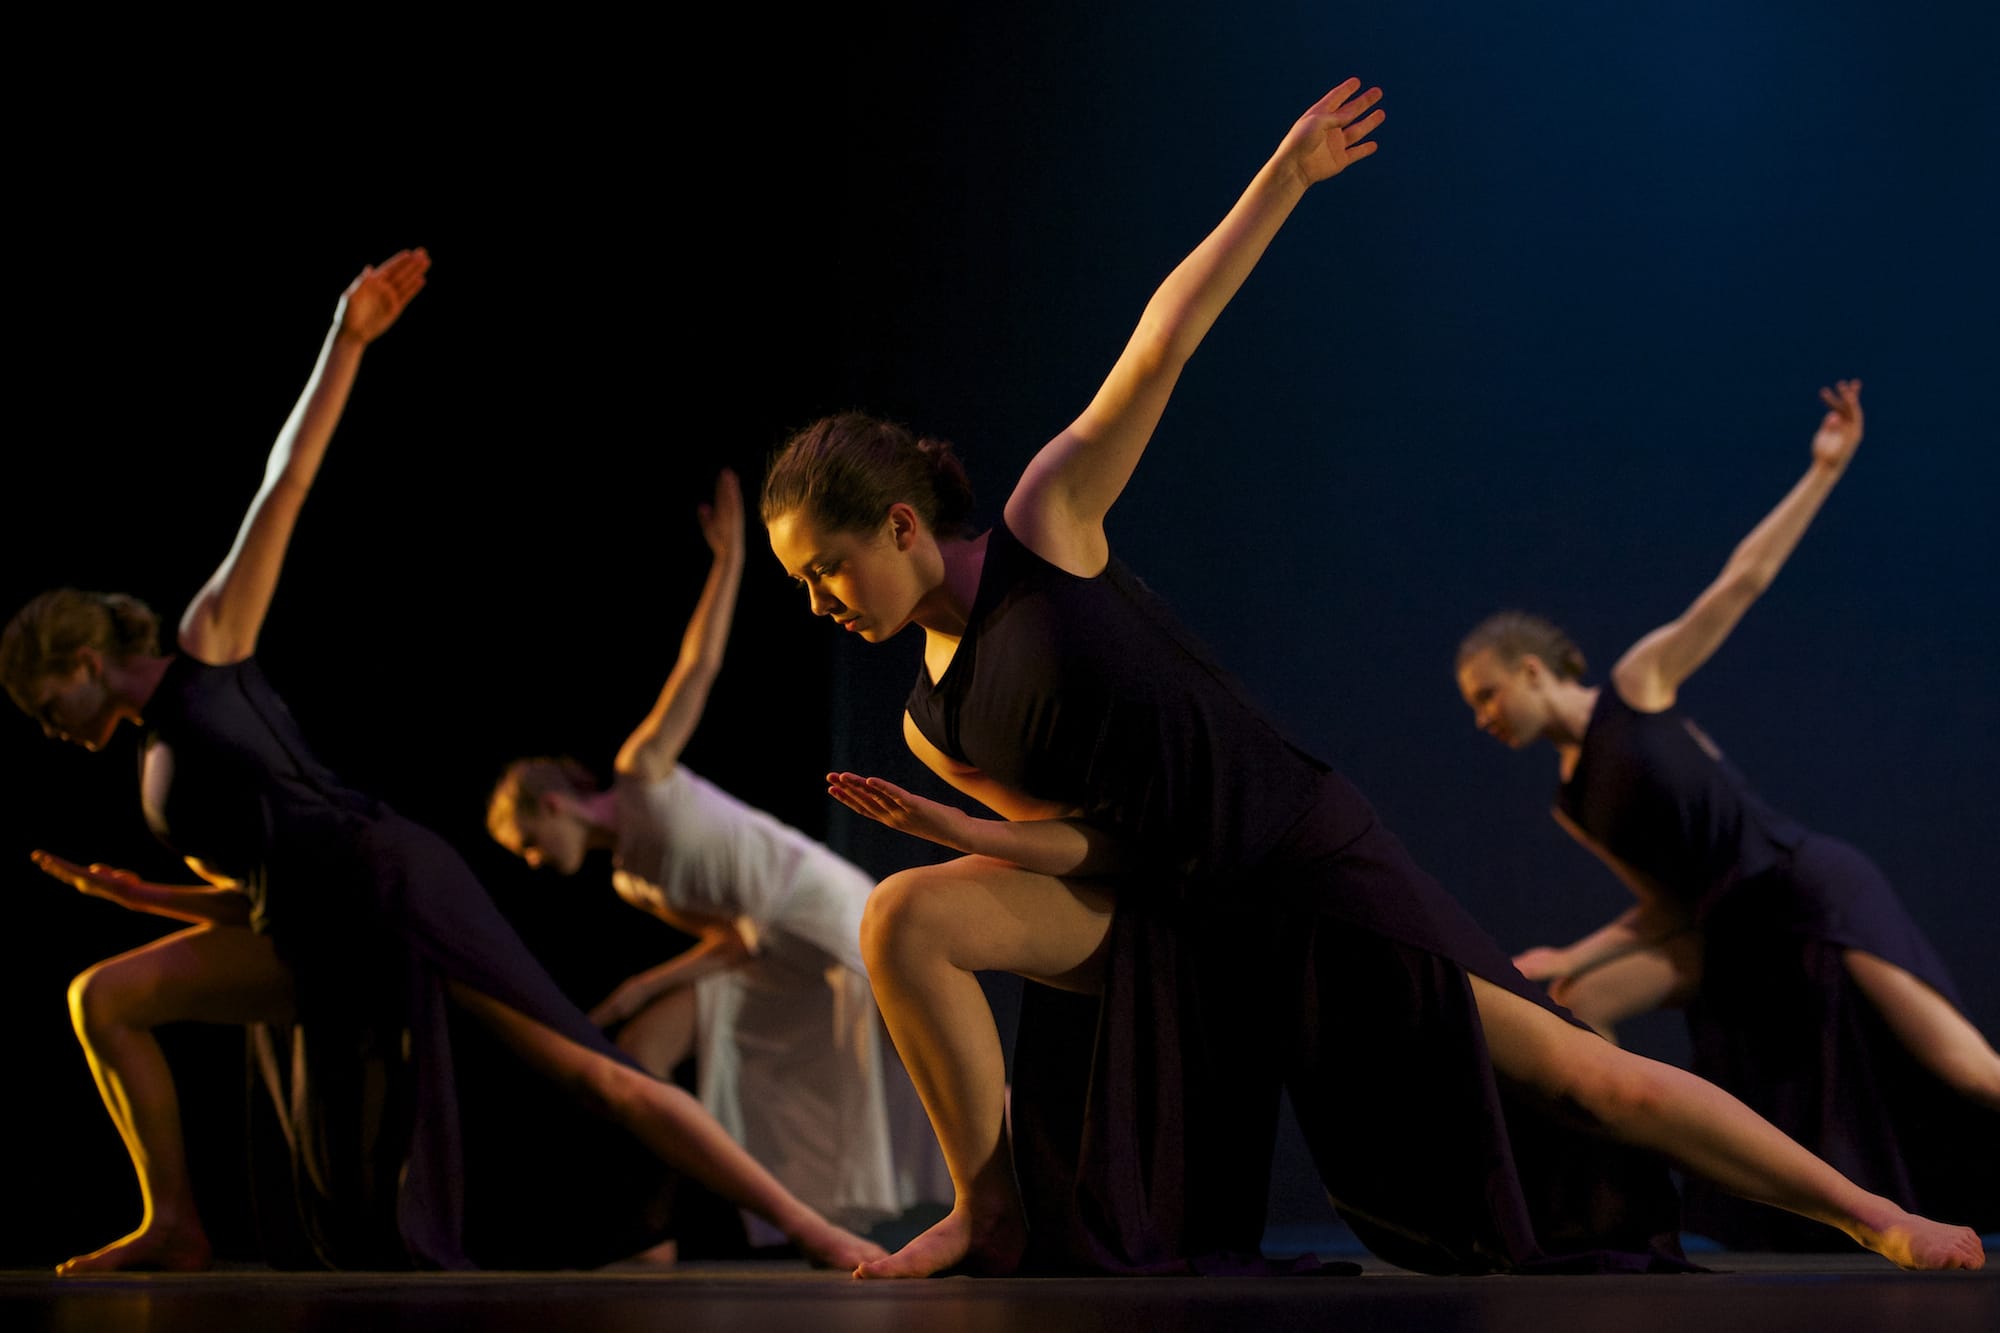 &quot;Columbia Dance Presents!&quot; features multiple dance performances by the Columbia Dance Company, today and Sunday at the Royal Durst Theater in Vancouver.